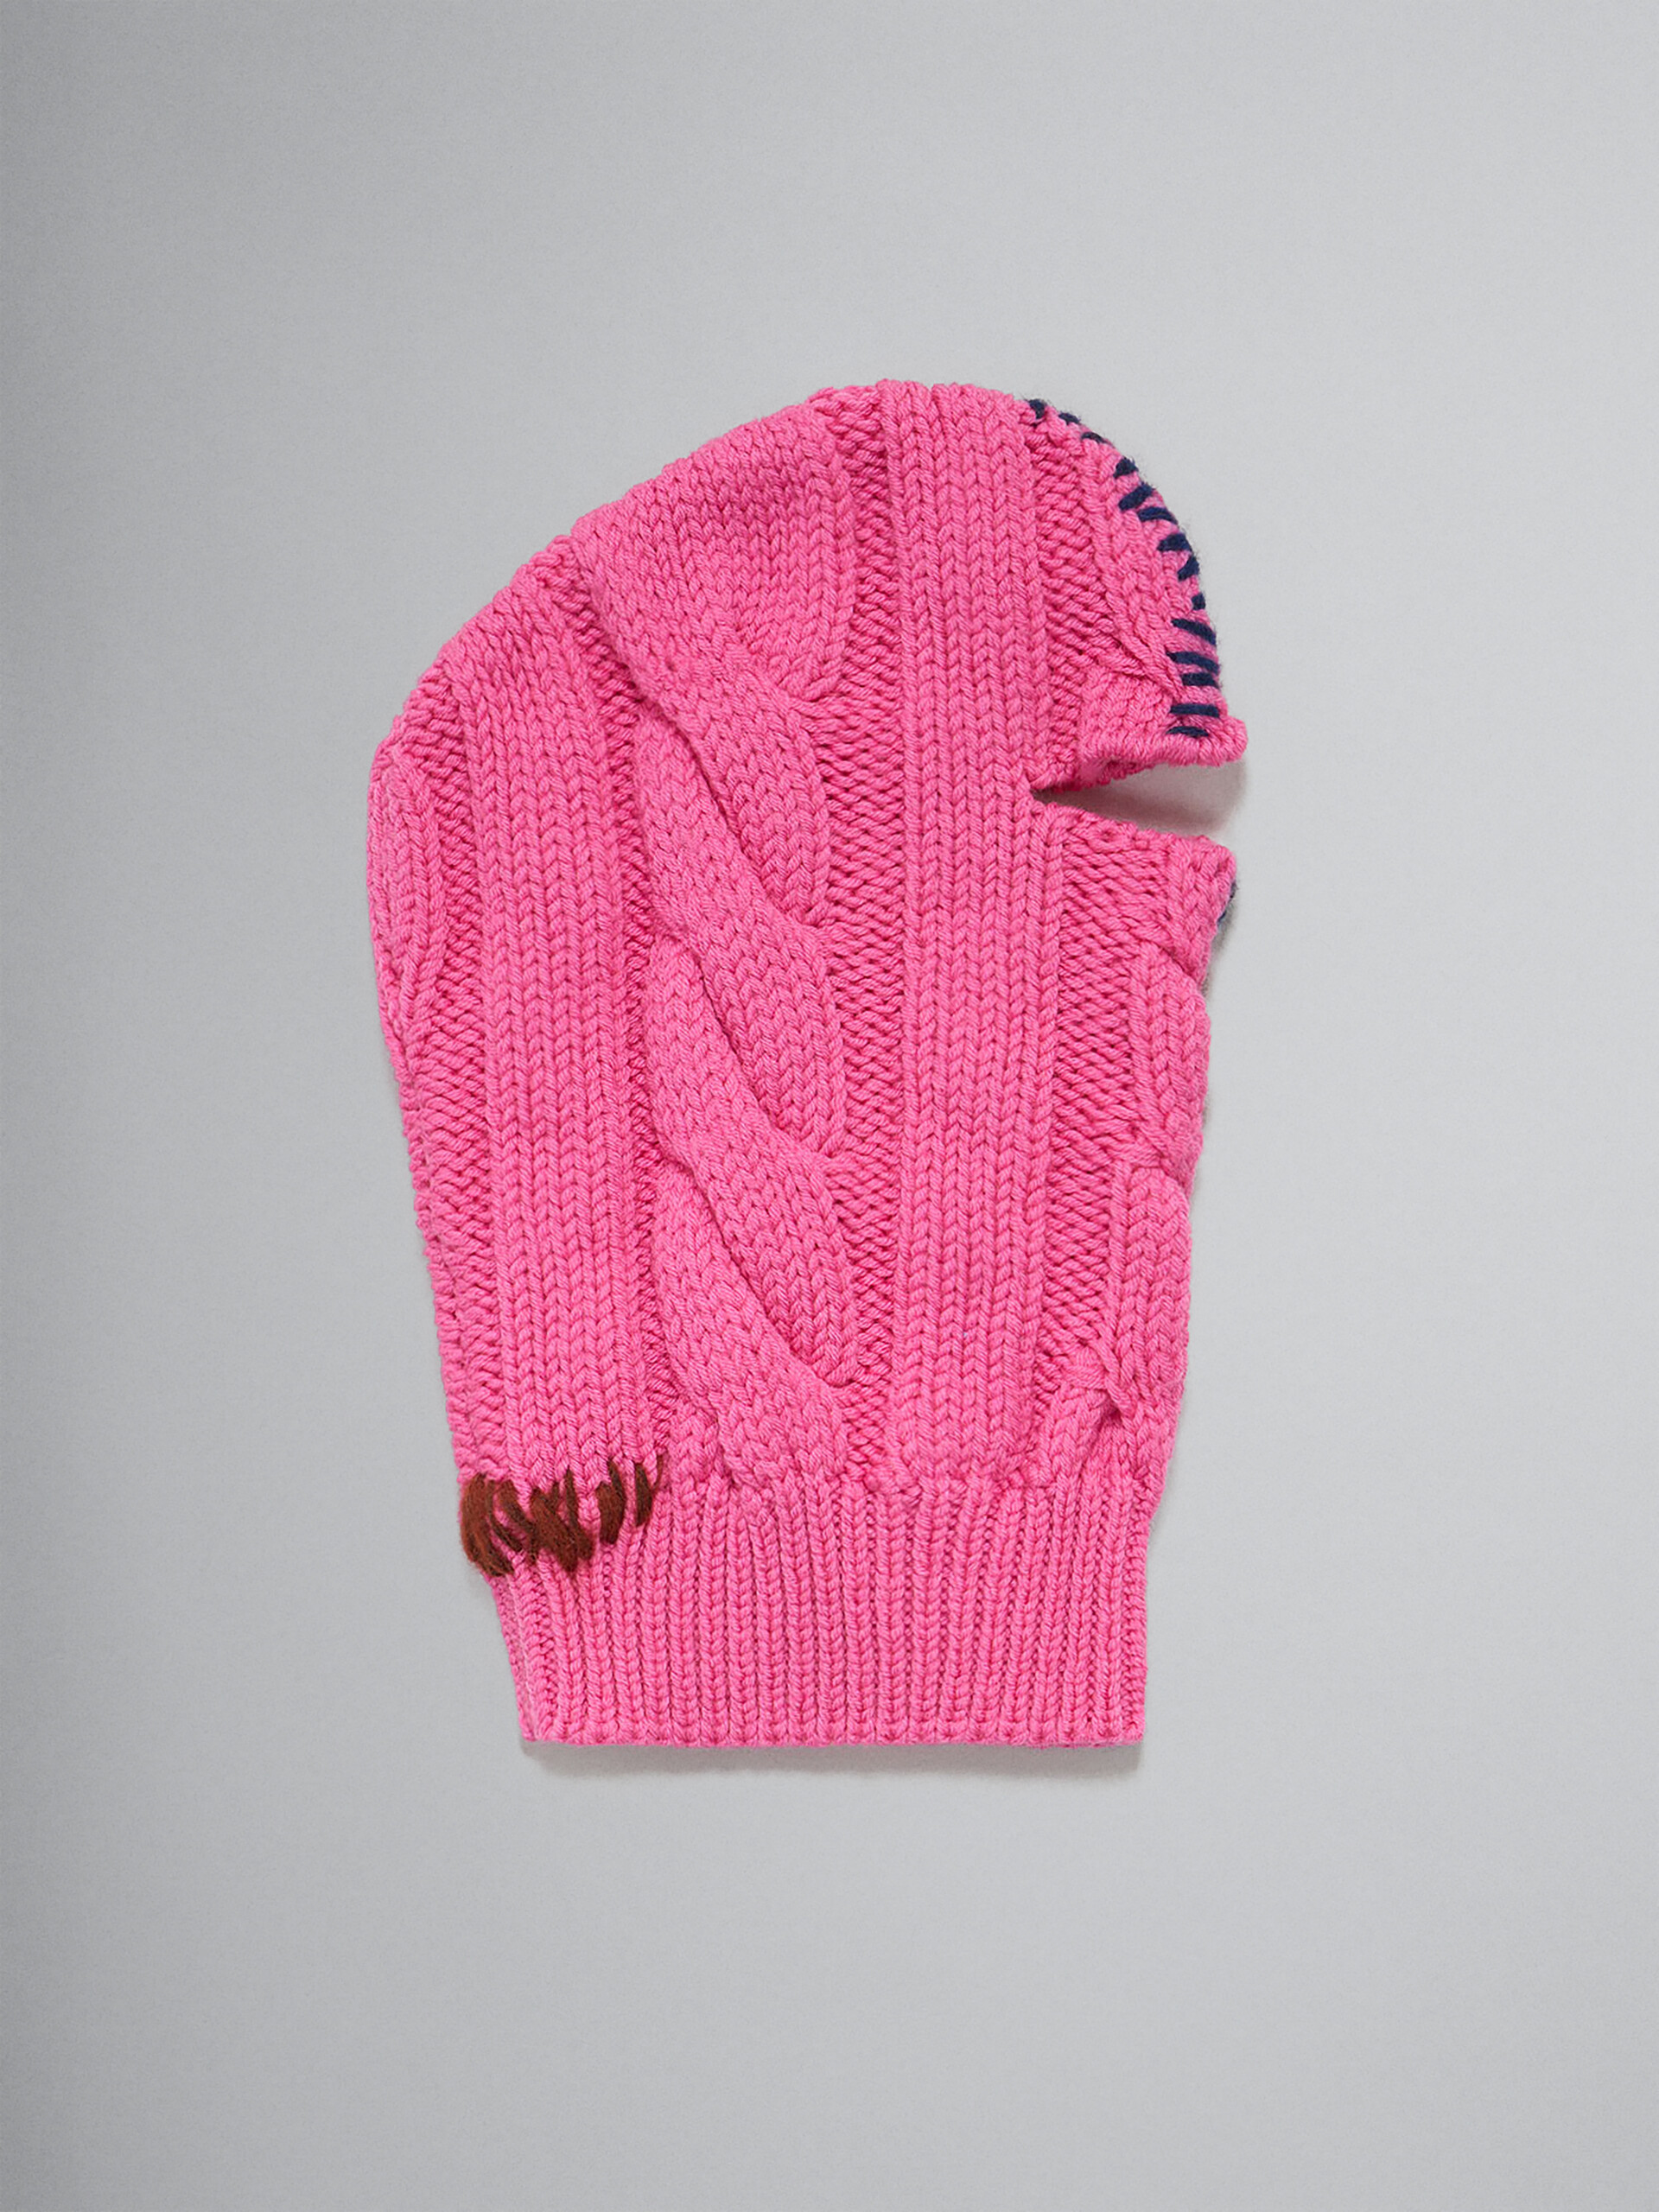 Fuchsia wool balaclava with contrasting mending - Other accessories - Image 1